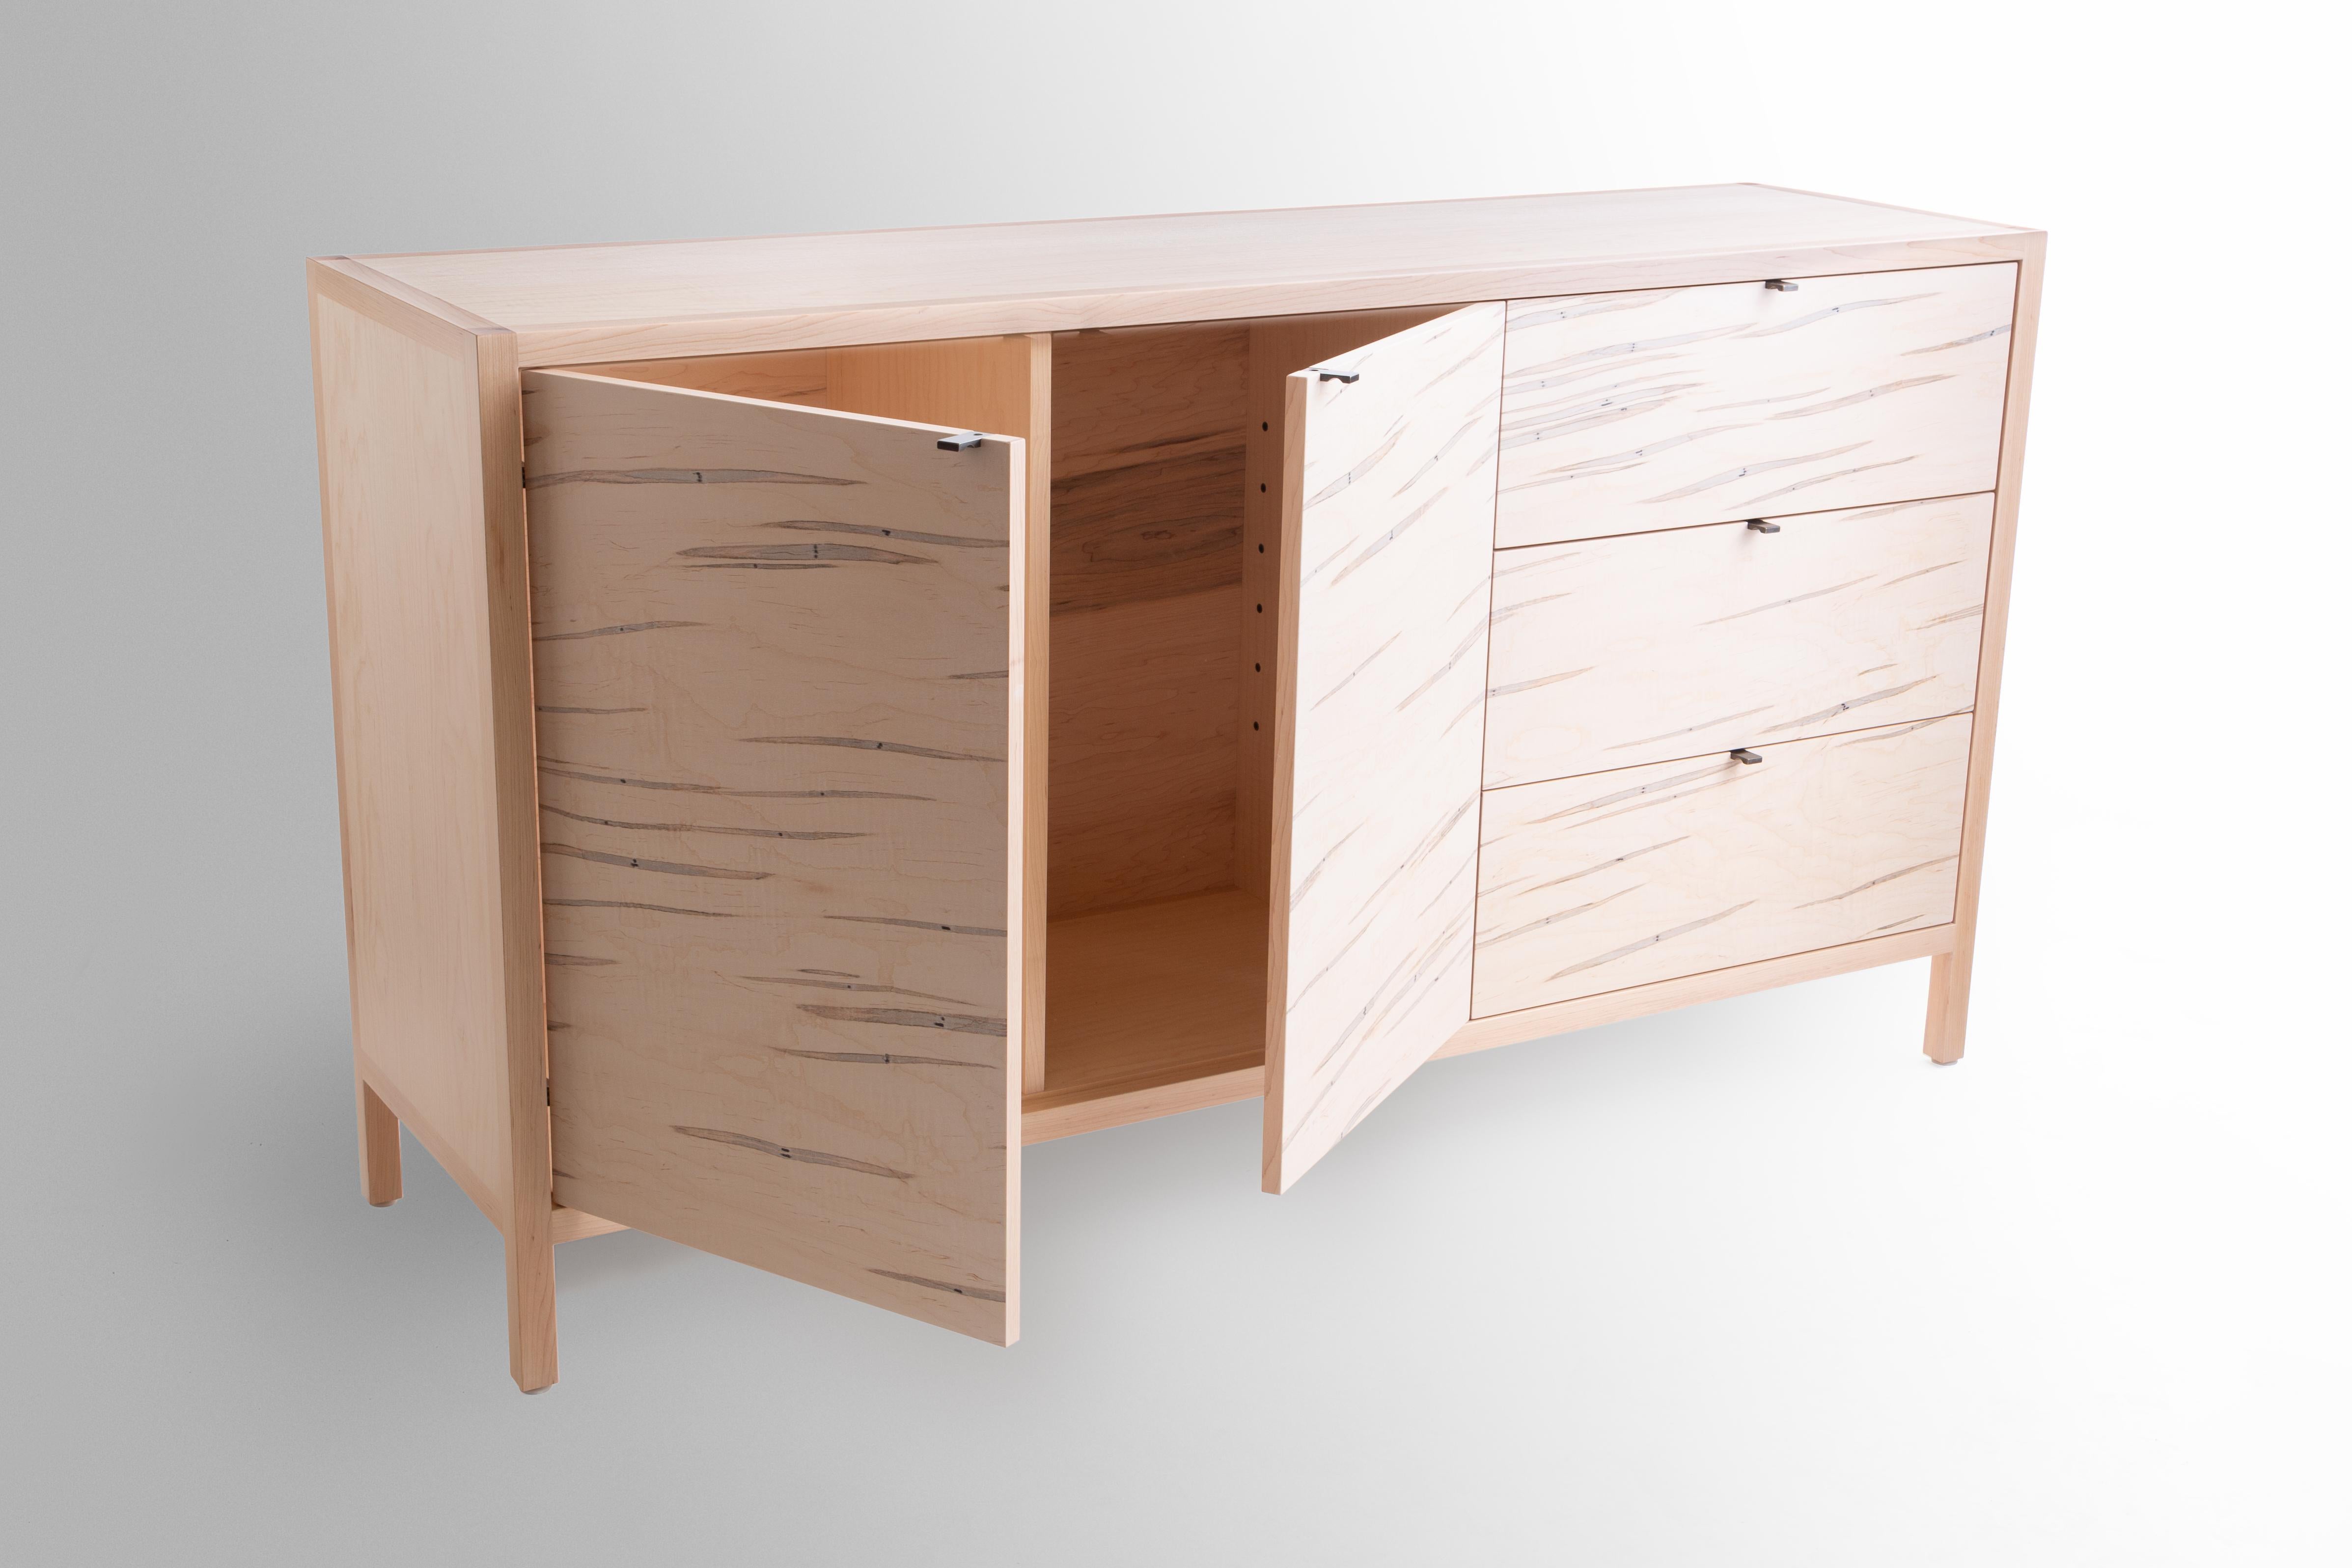 The Laska credenza is built in our Louisville, KY studio using premium hardwoods and thoughtfully selected wood veneers. This piece features custom veneered panels framed flush with solid hardwood edges and legs. The three solid wood drawers ride on